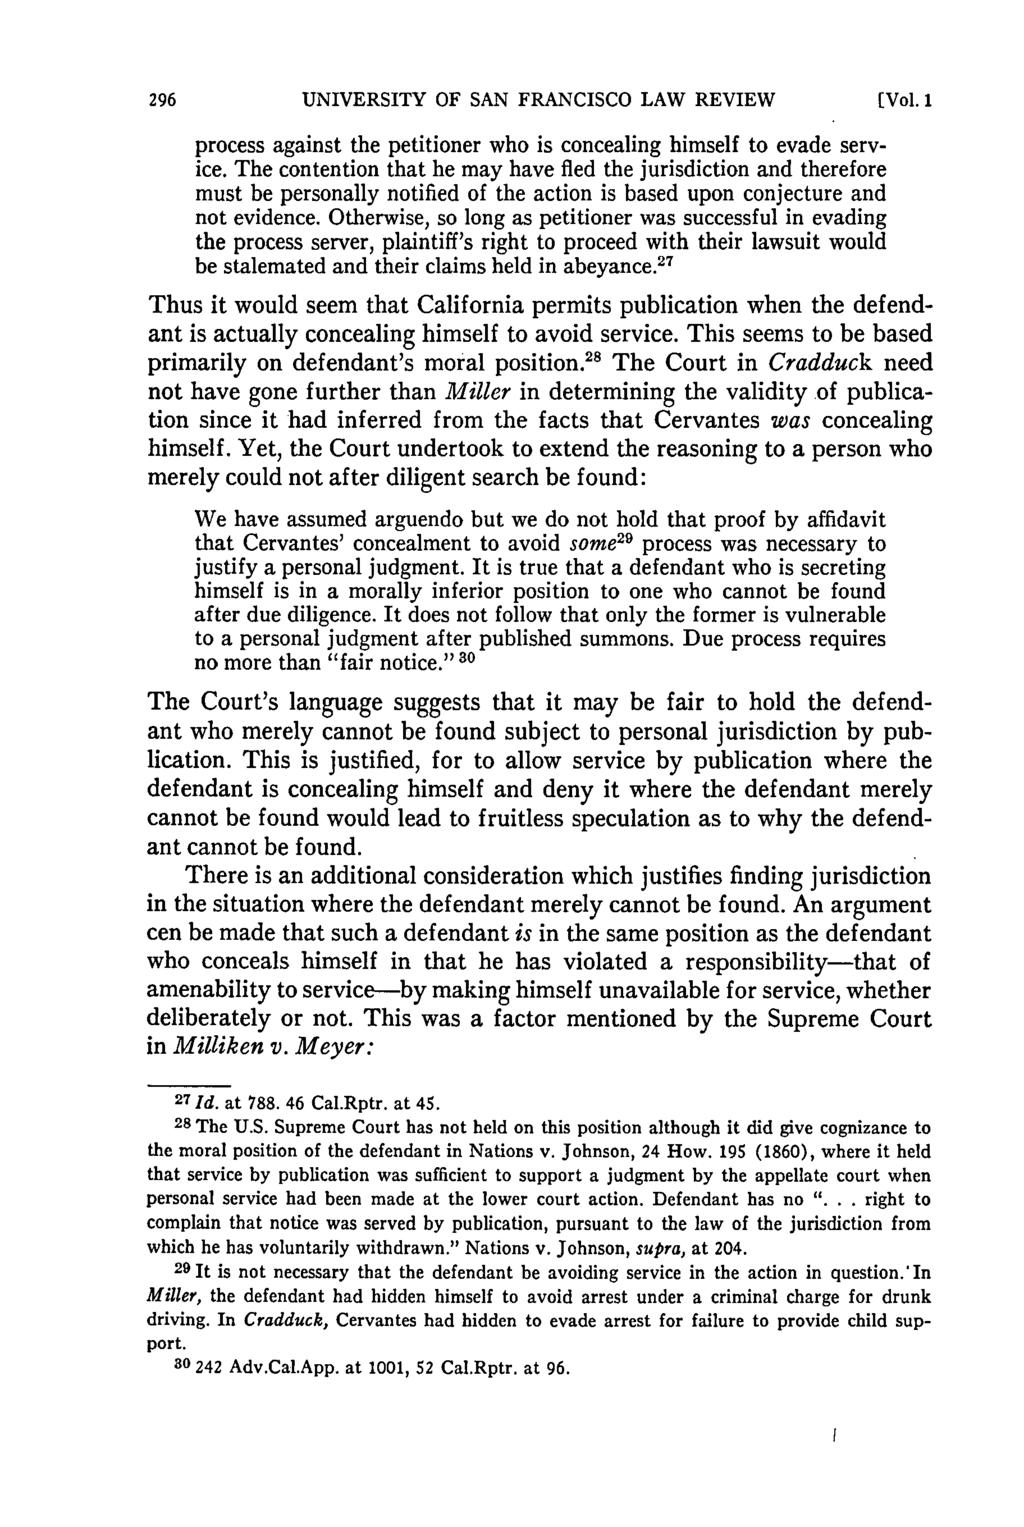 UNIVERSITY OF SAN FRANCISCO LAW REVIEW (Vol. I process against the petitioner who is concealing himself to evade service.